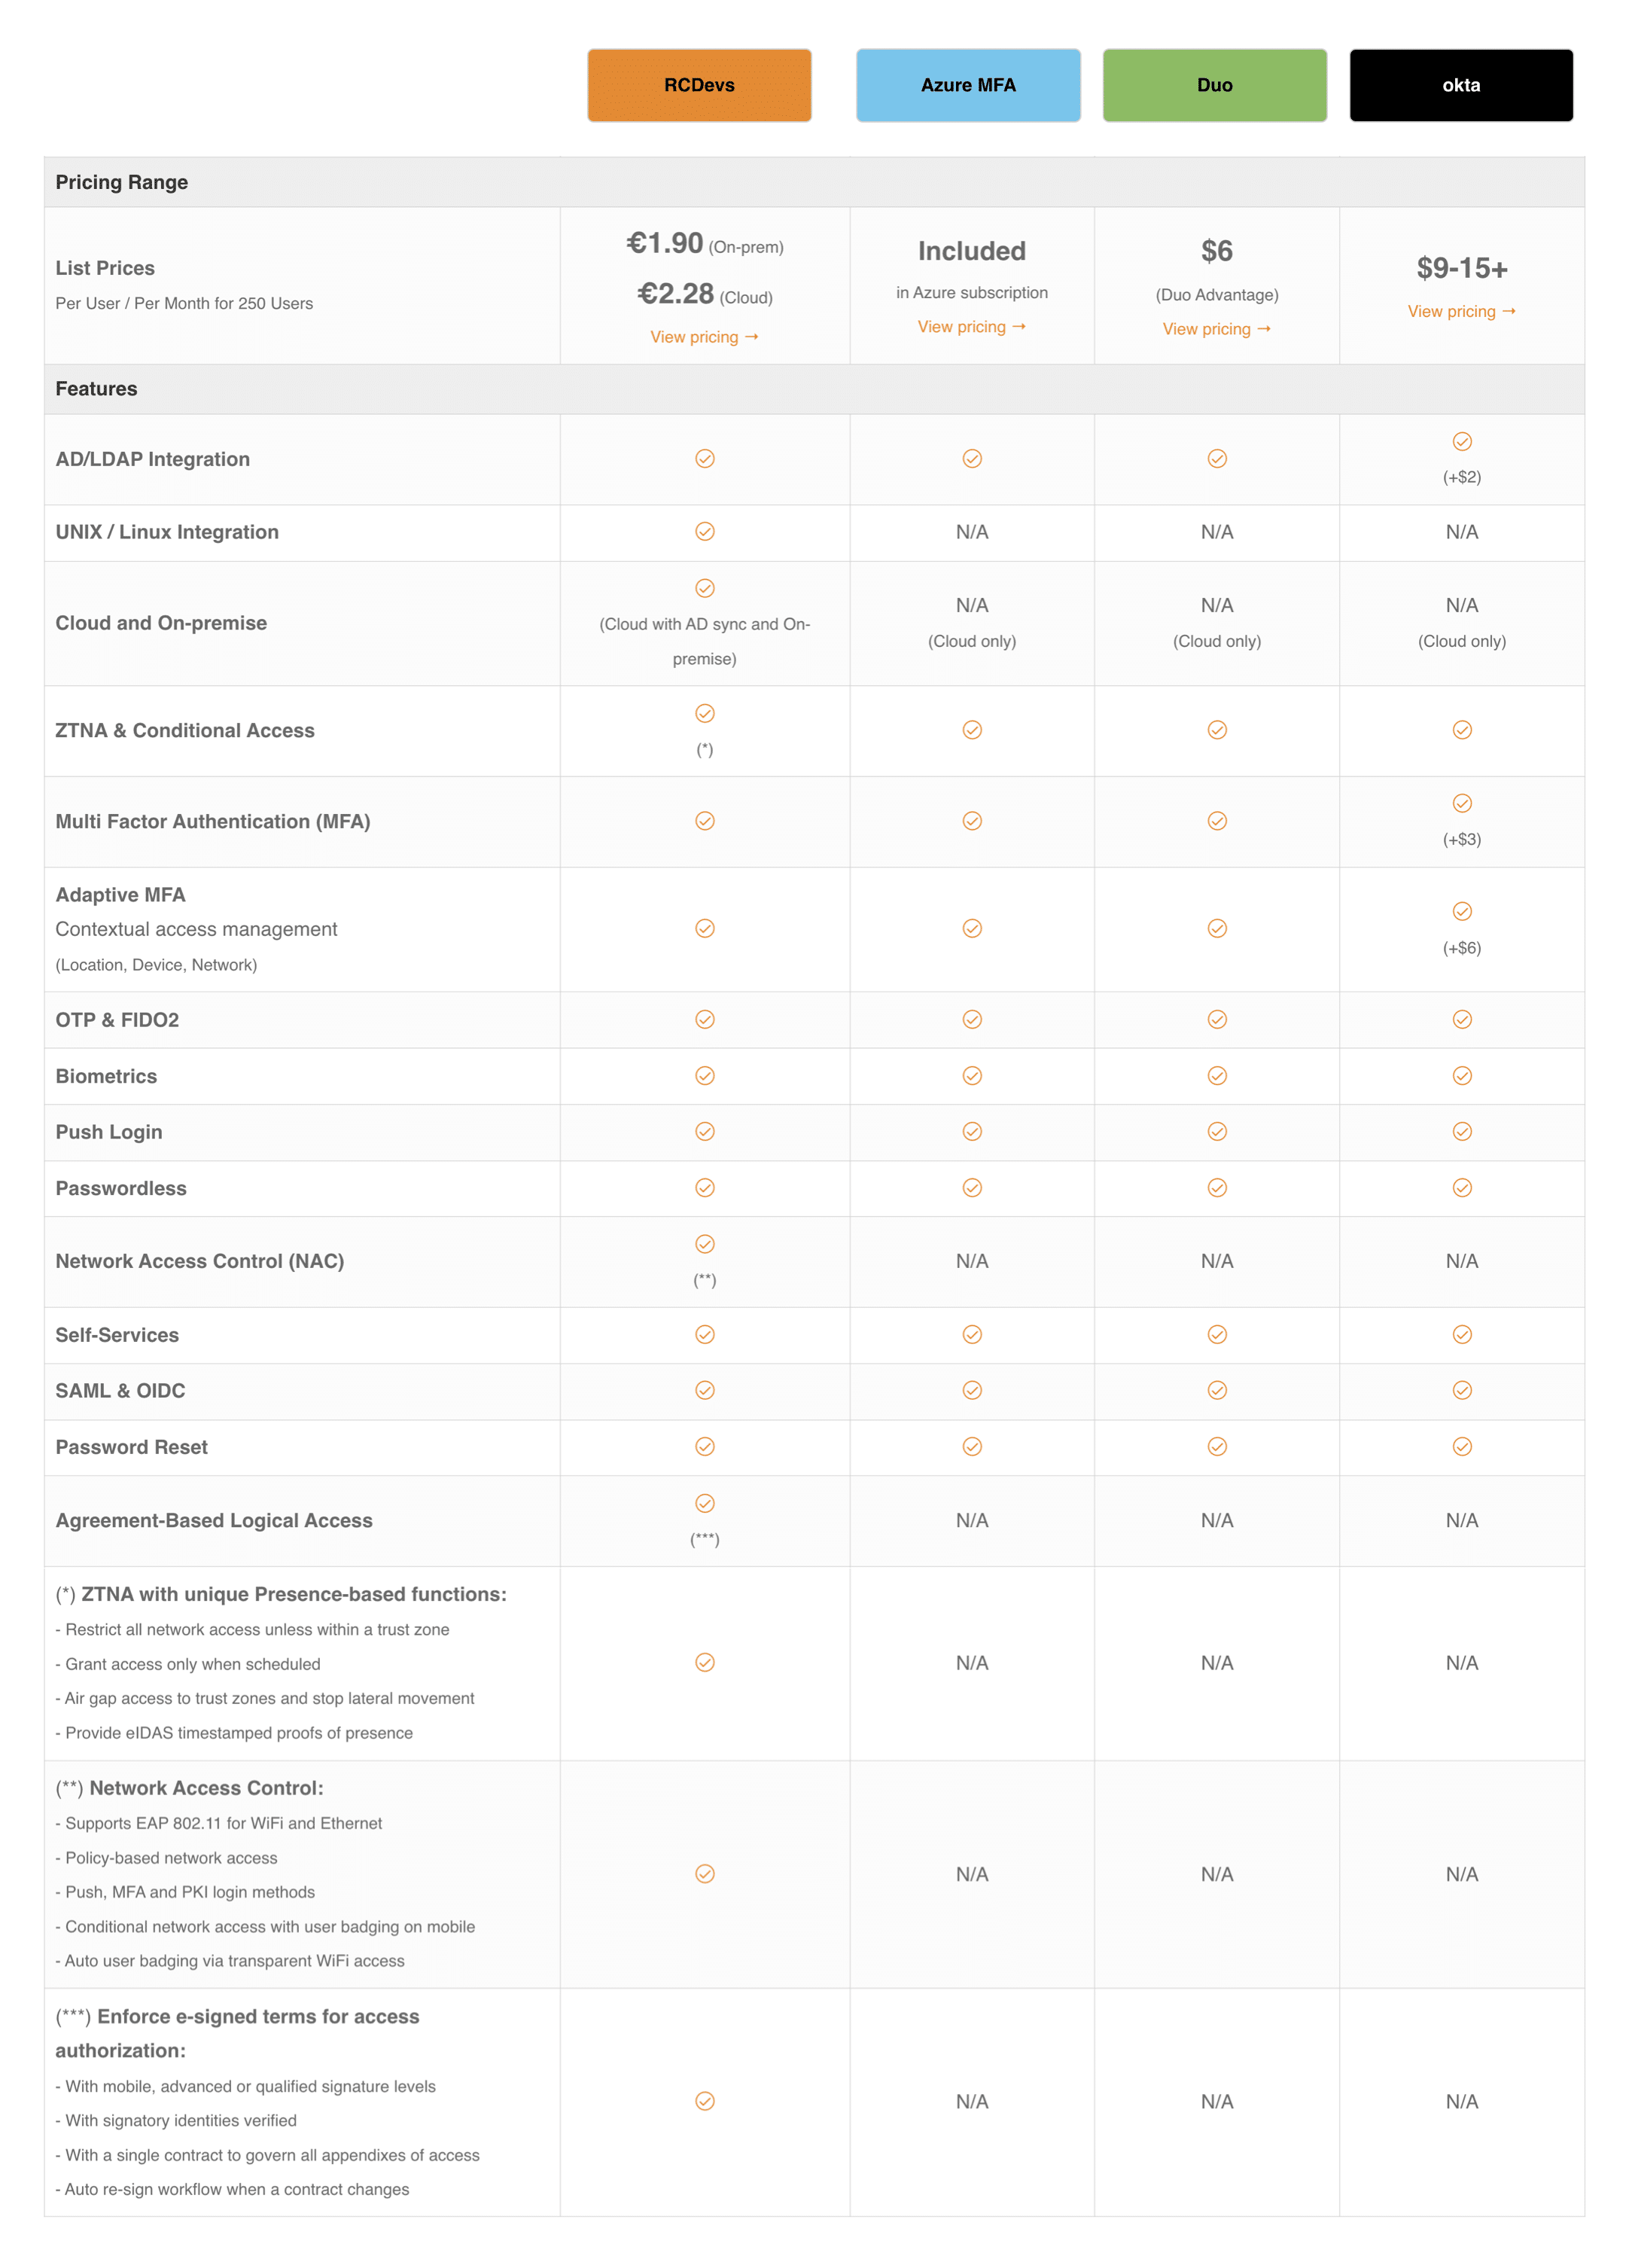 Compare pricing and features of Cloud IAM and MFA solutions - RCDevs, Azure, Duo and Okta